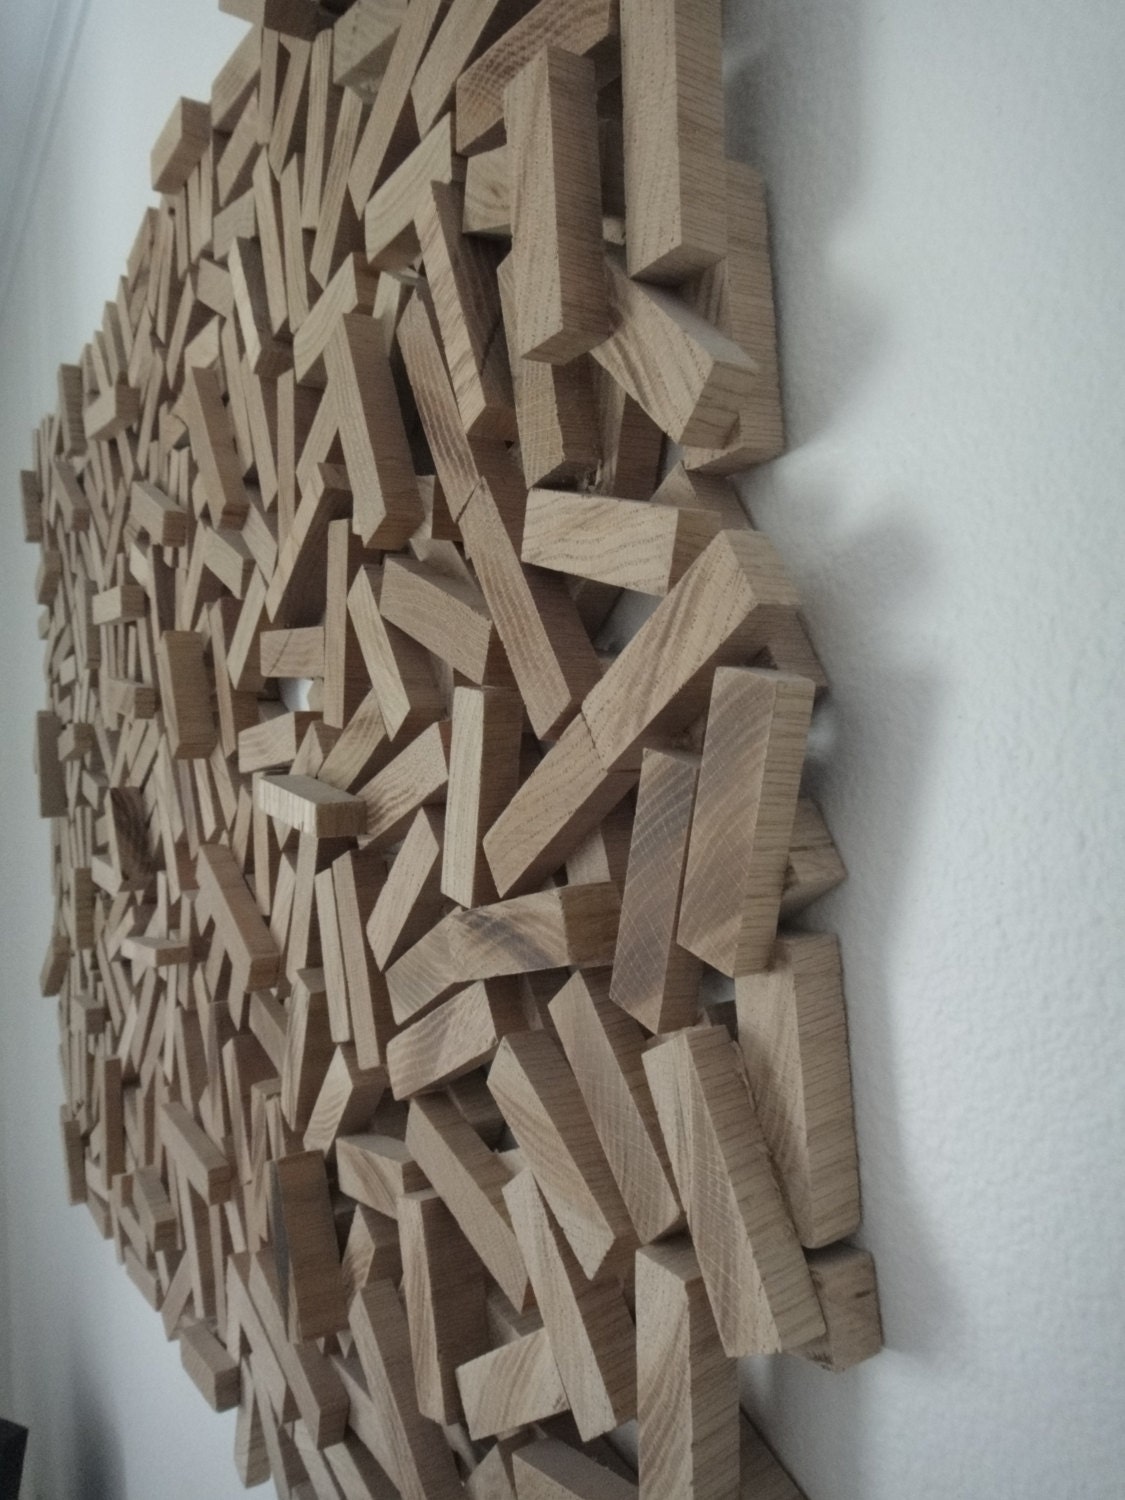 Abstract Wood Sculpture, Wall Hanging, Wood Wall Art, 'Wood strips ...